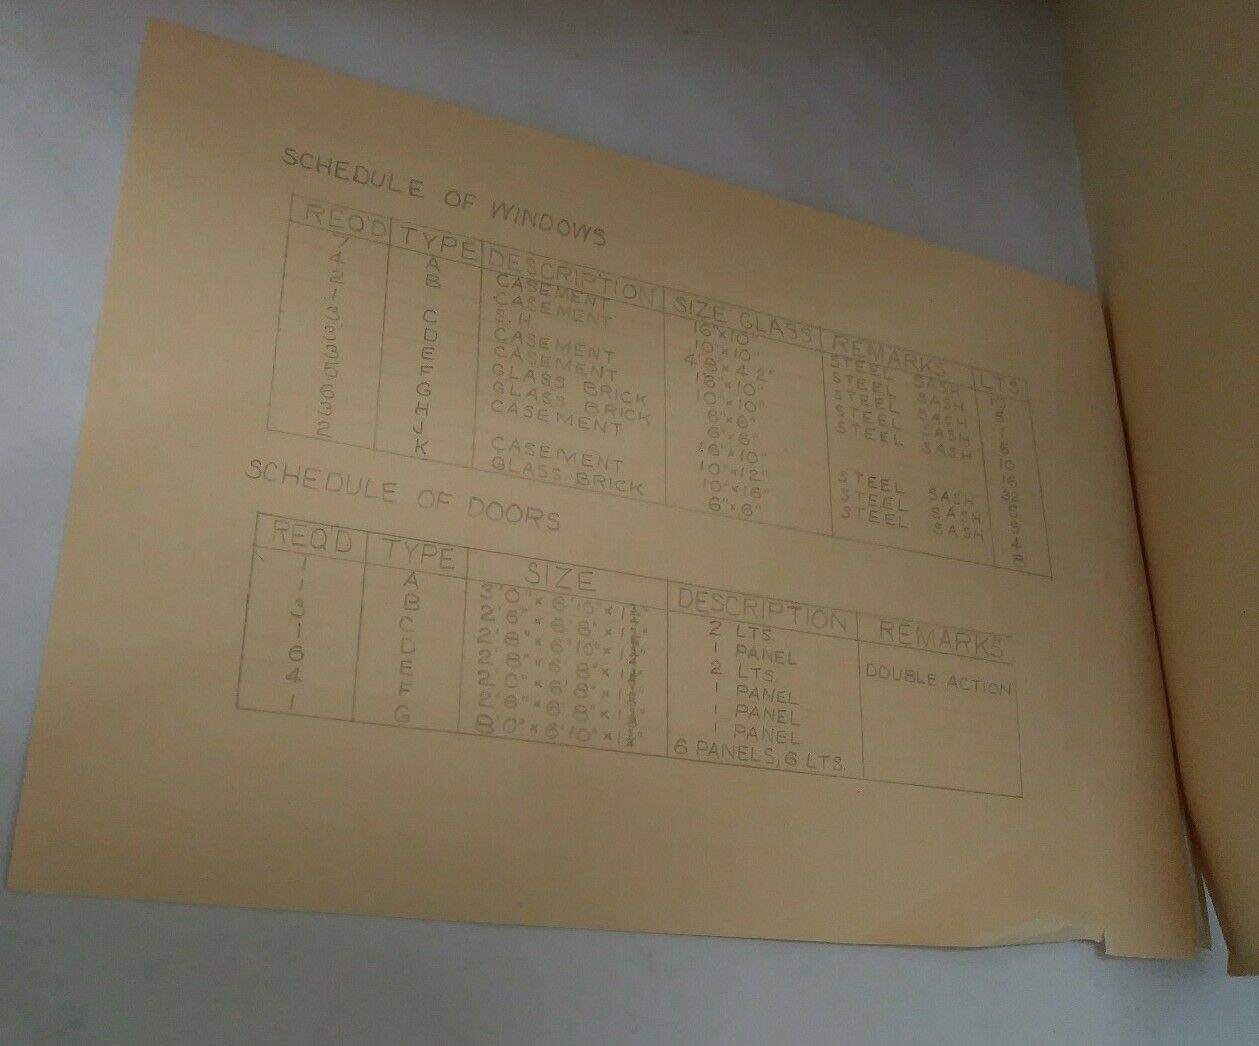 1951 Architectural Drawings Of Jon Collins Later to Become Aeronautical Engineer